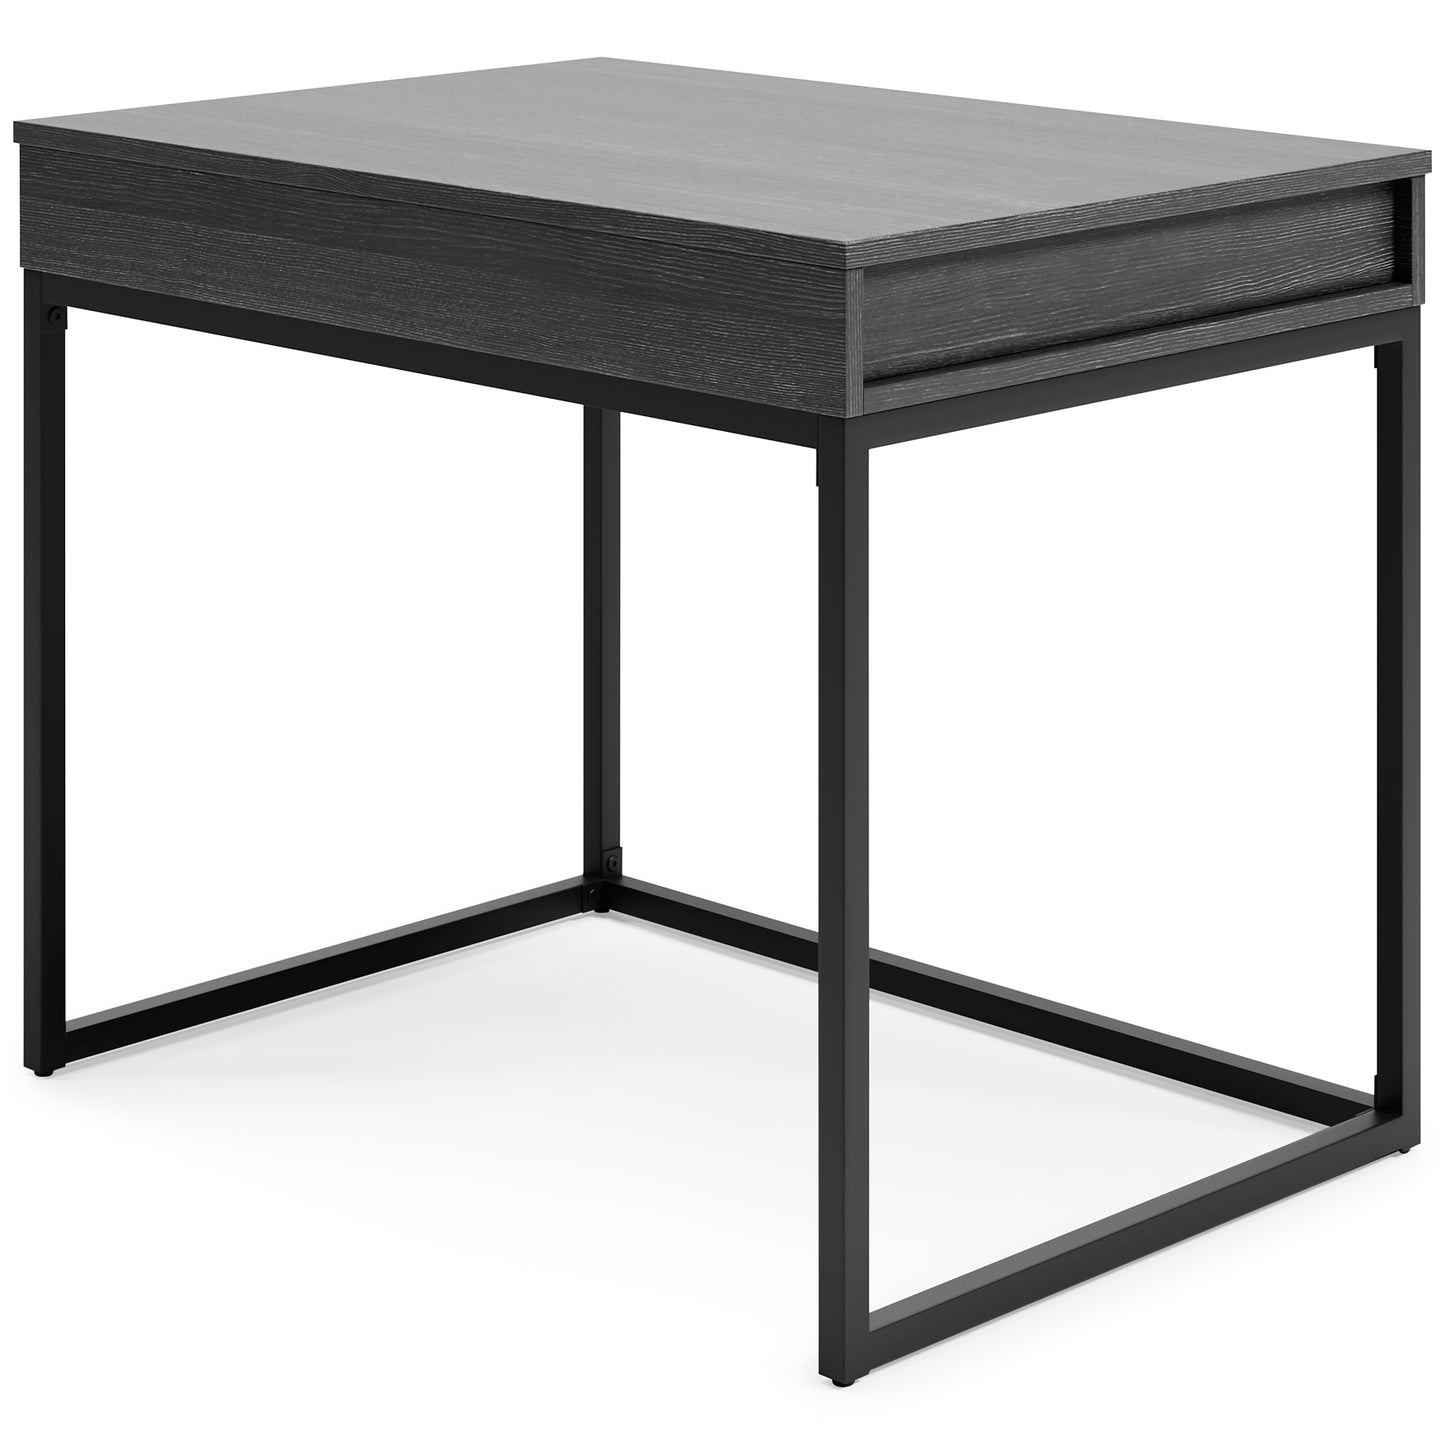 Yarlow Home Office Lift Top Desk Signature Design by Ashley®